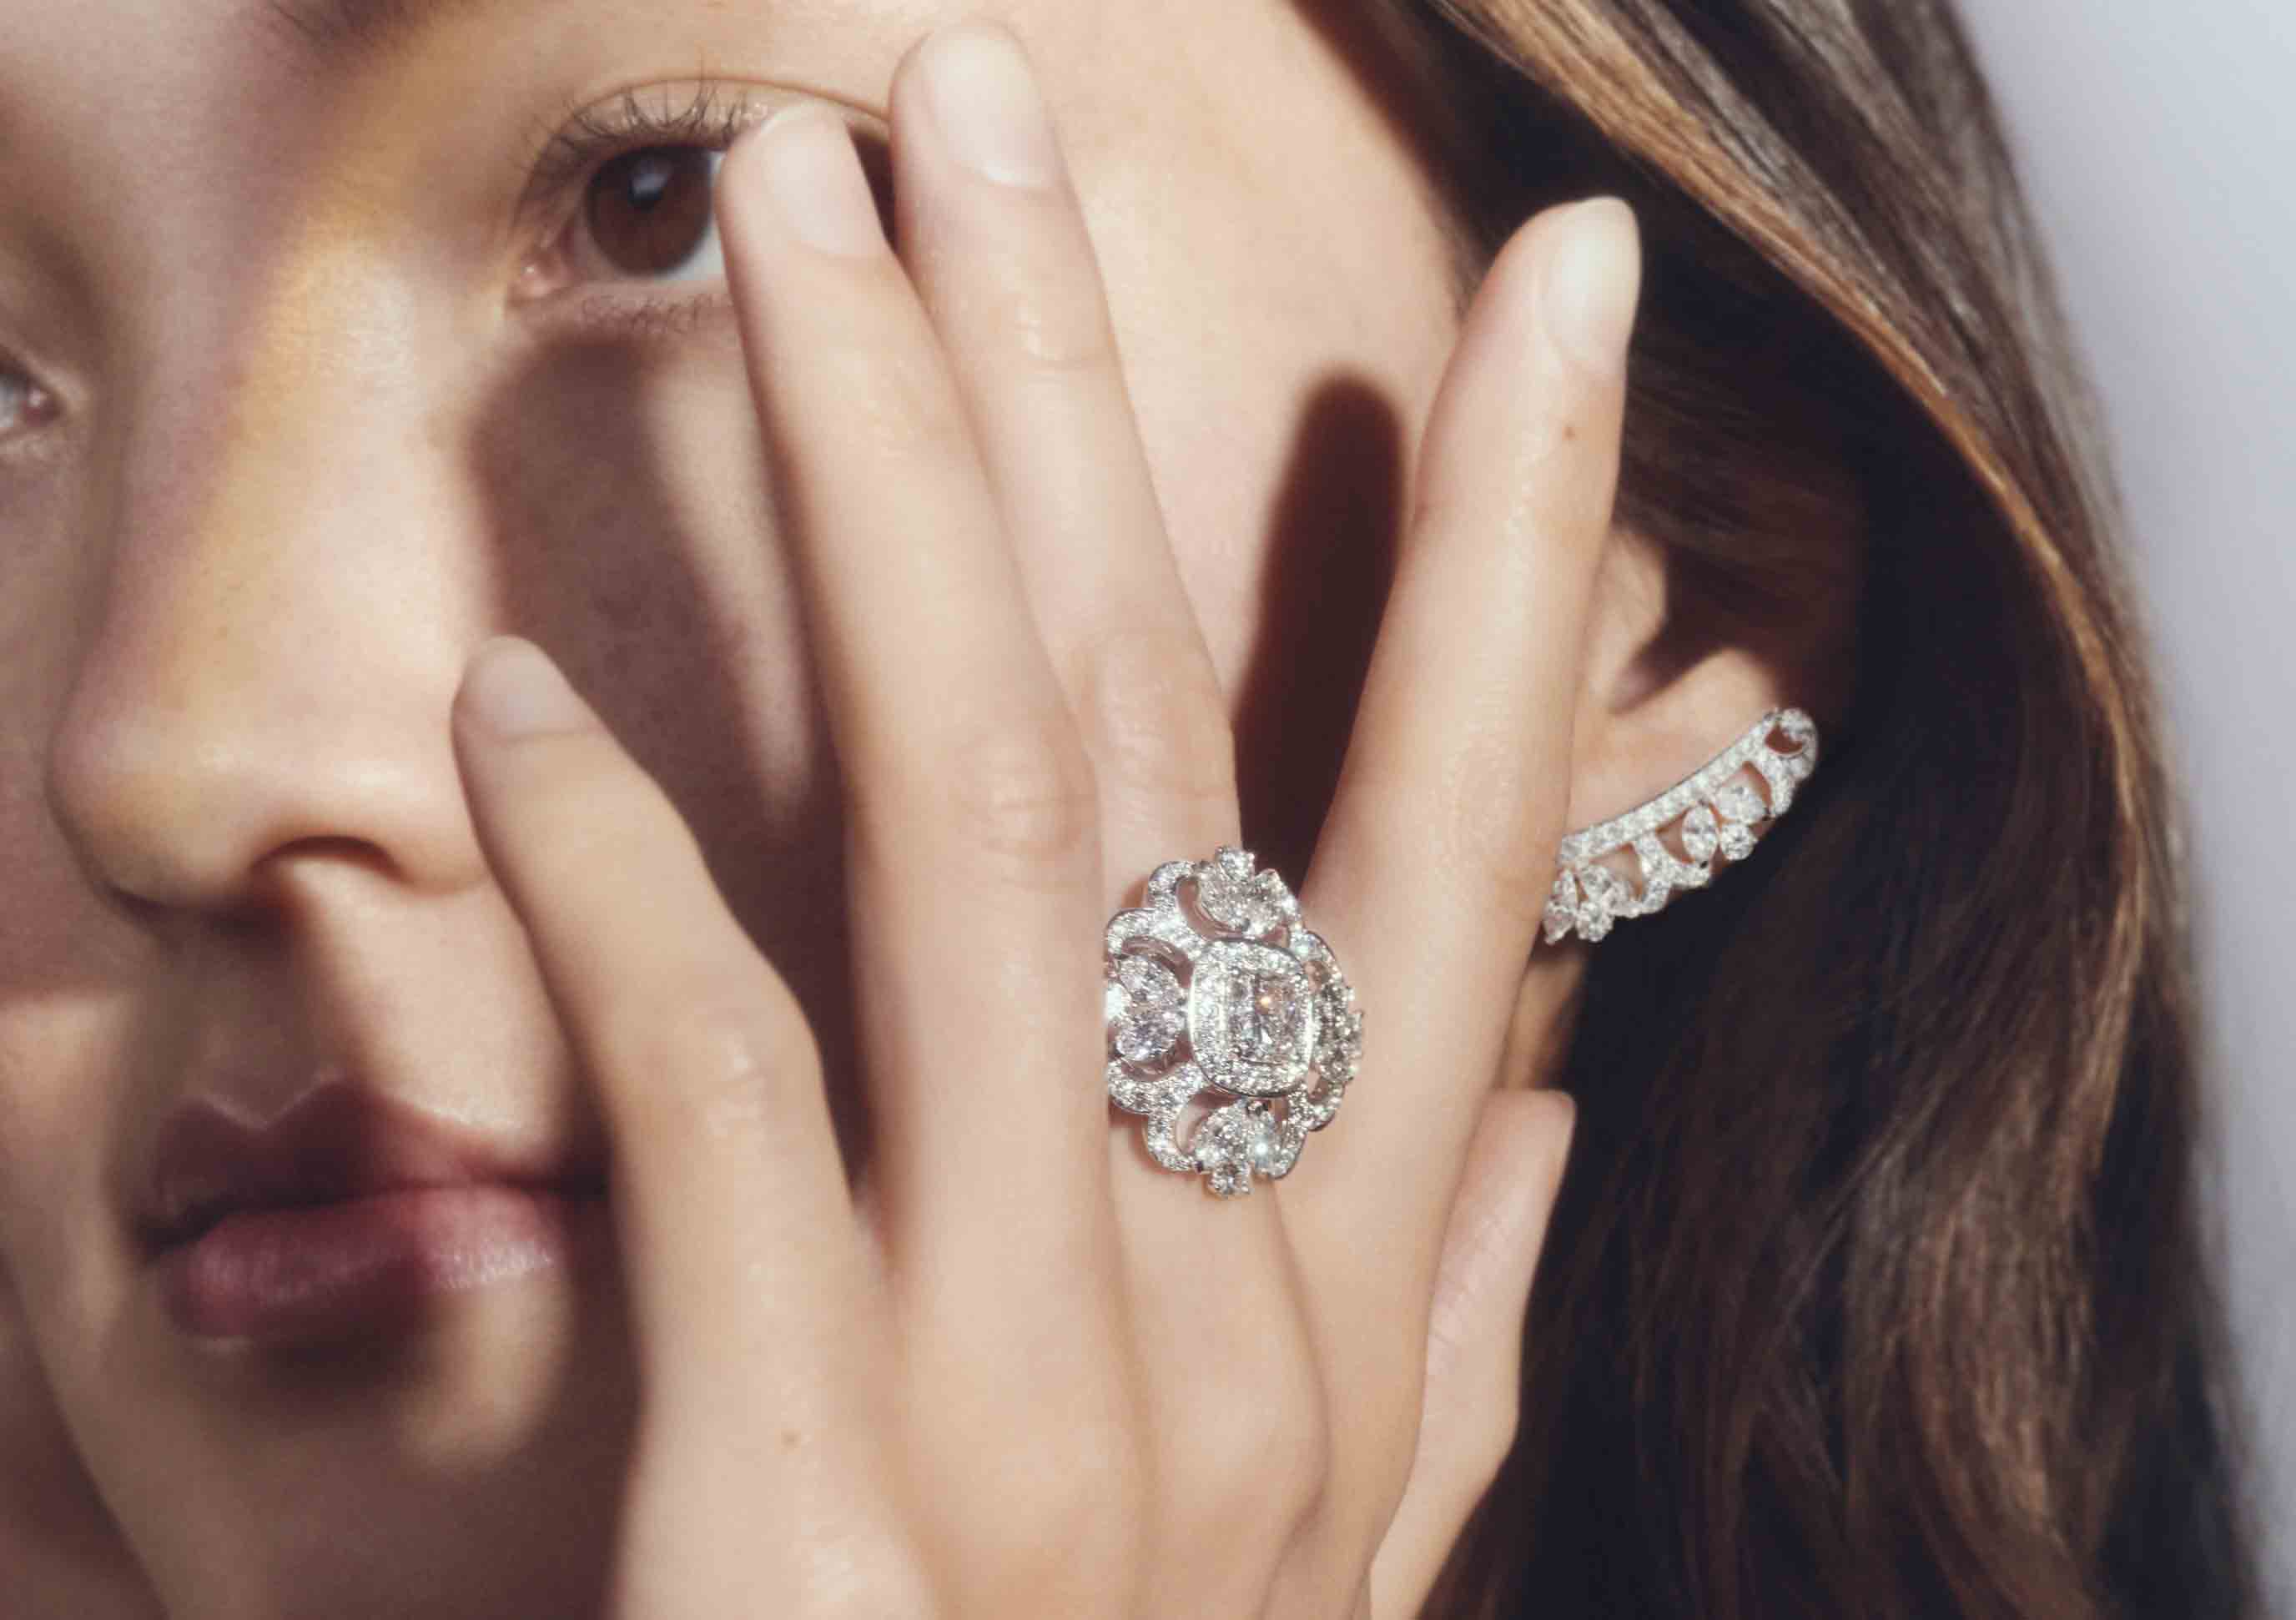 De Beers celebrates diamond beauty spots with Reflections of